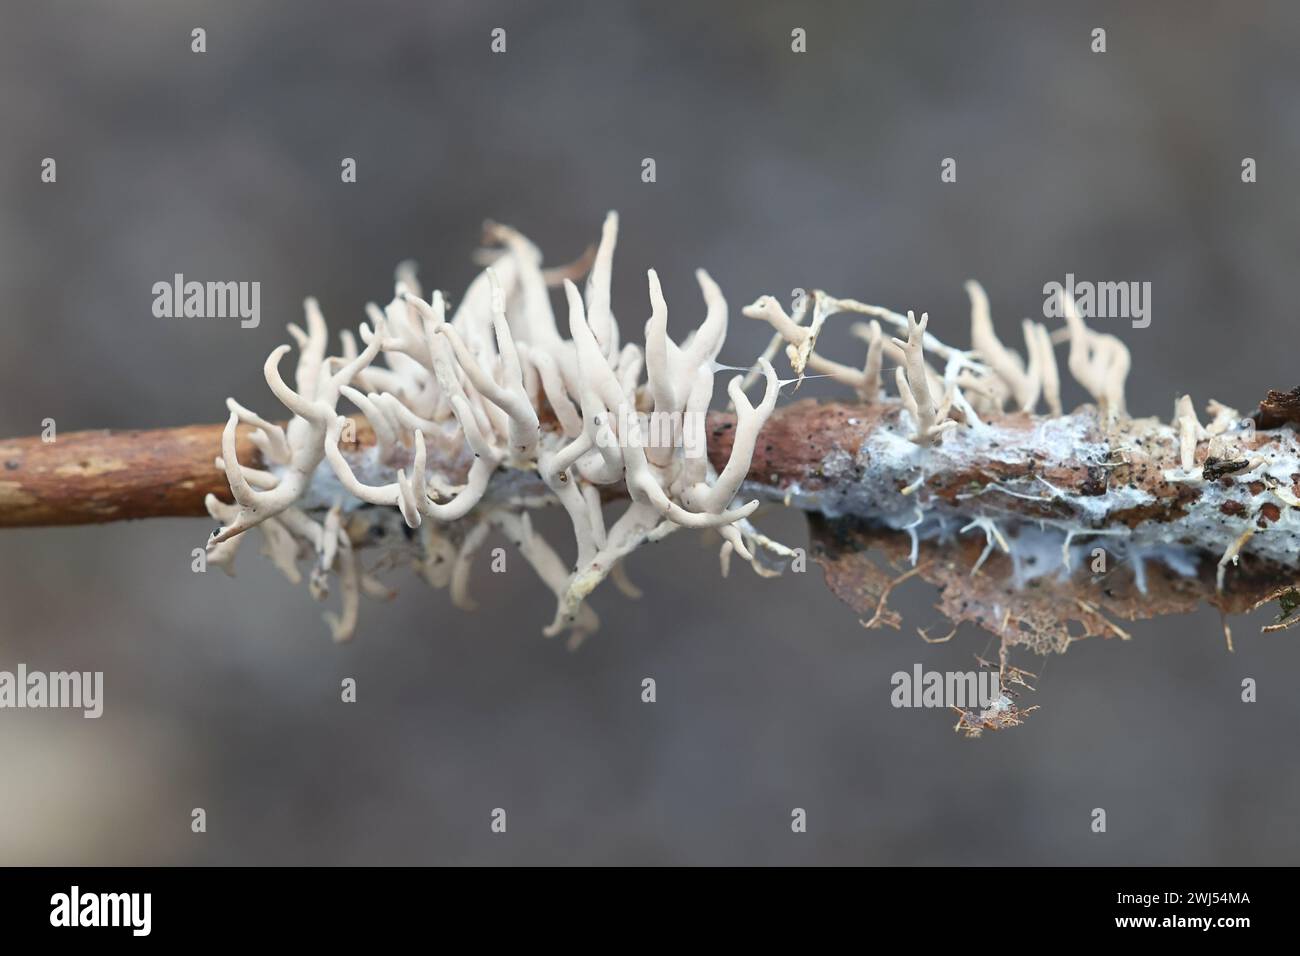 Lentaria byssiseda, a coral fungus from Finland, no common English name Stock Photo